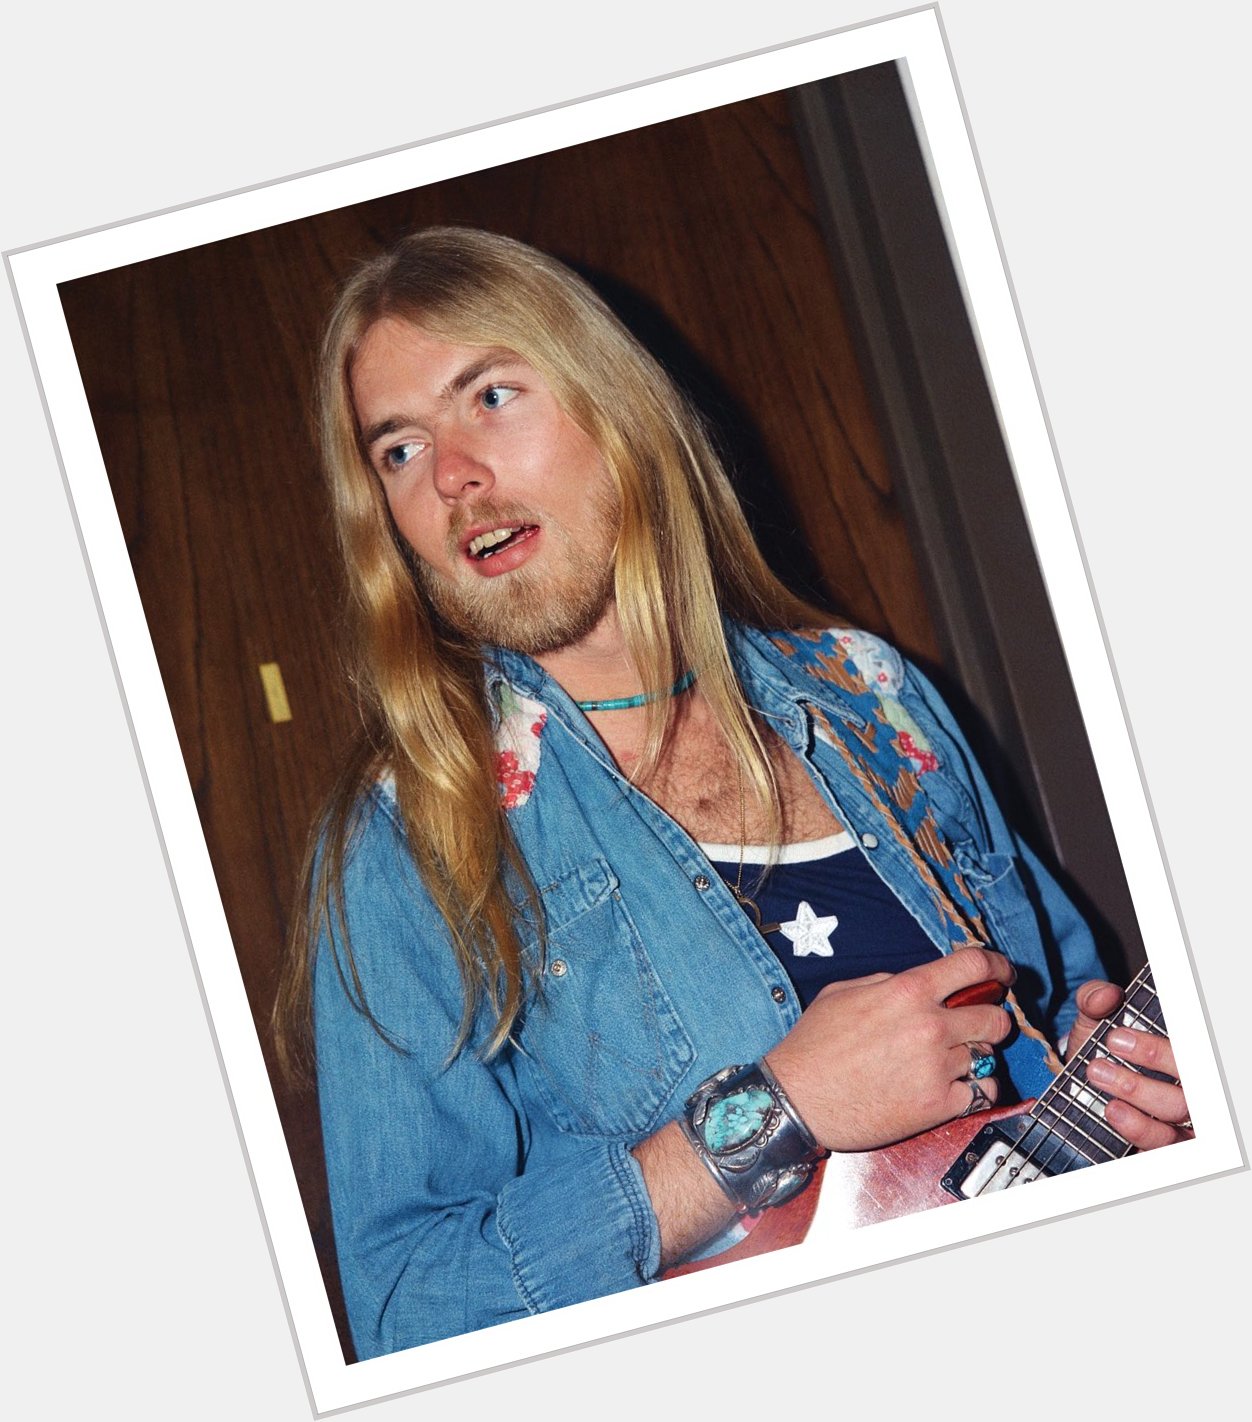 Happy birthday to Gregg Allman! He would ve been 73 today 